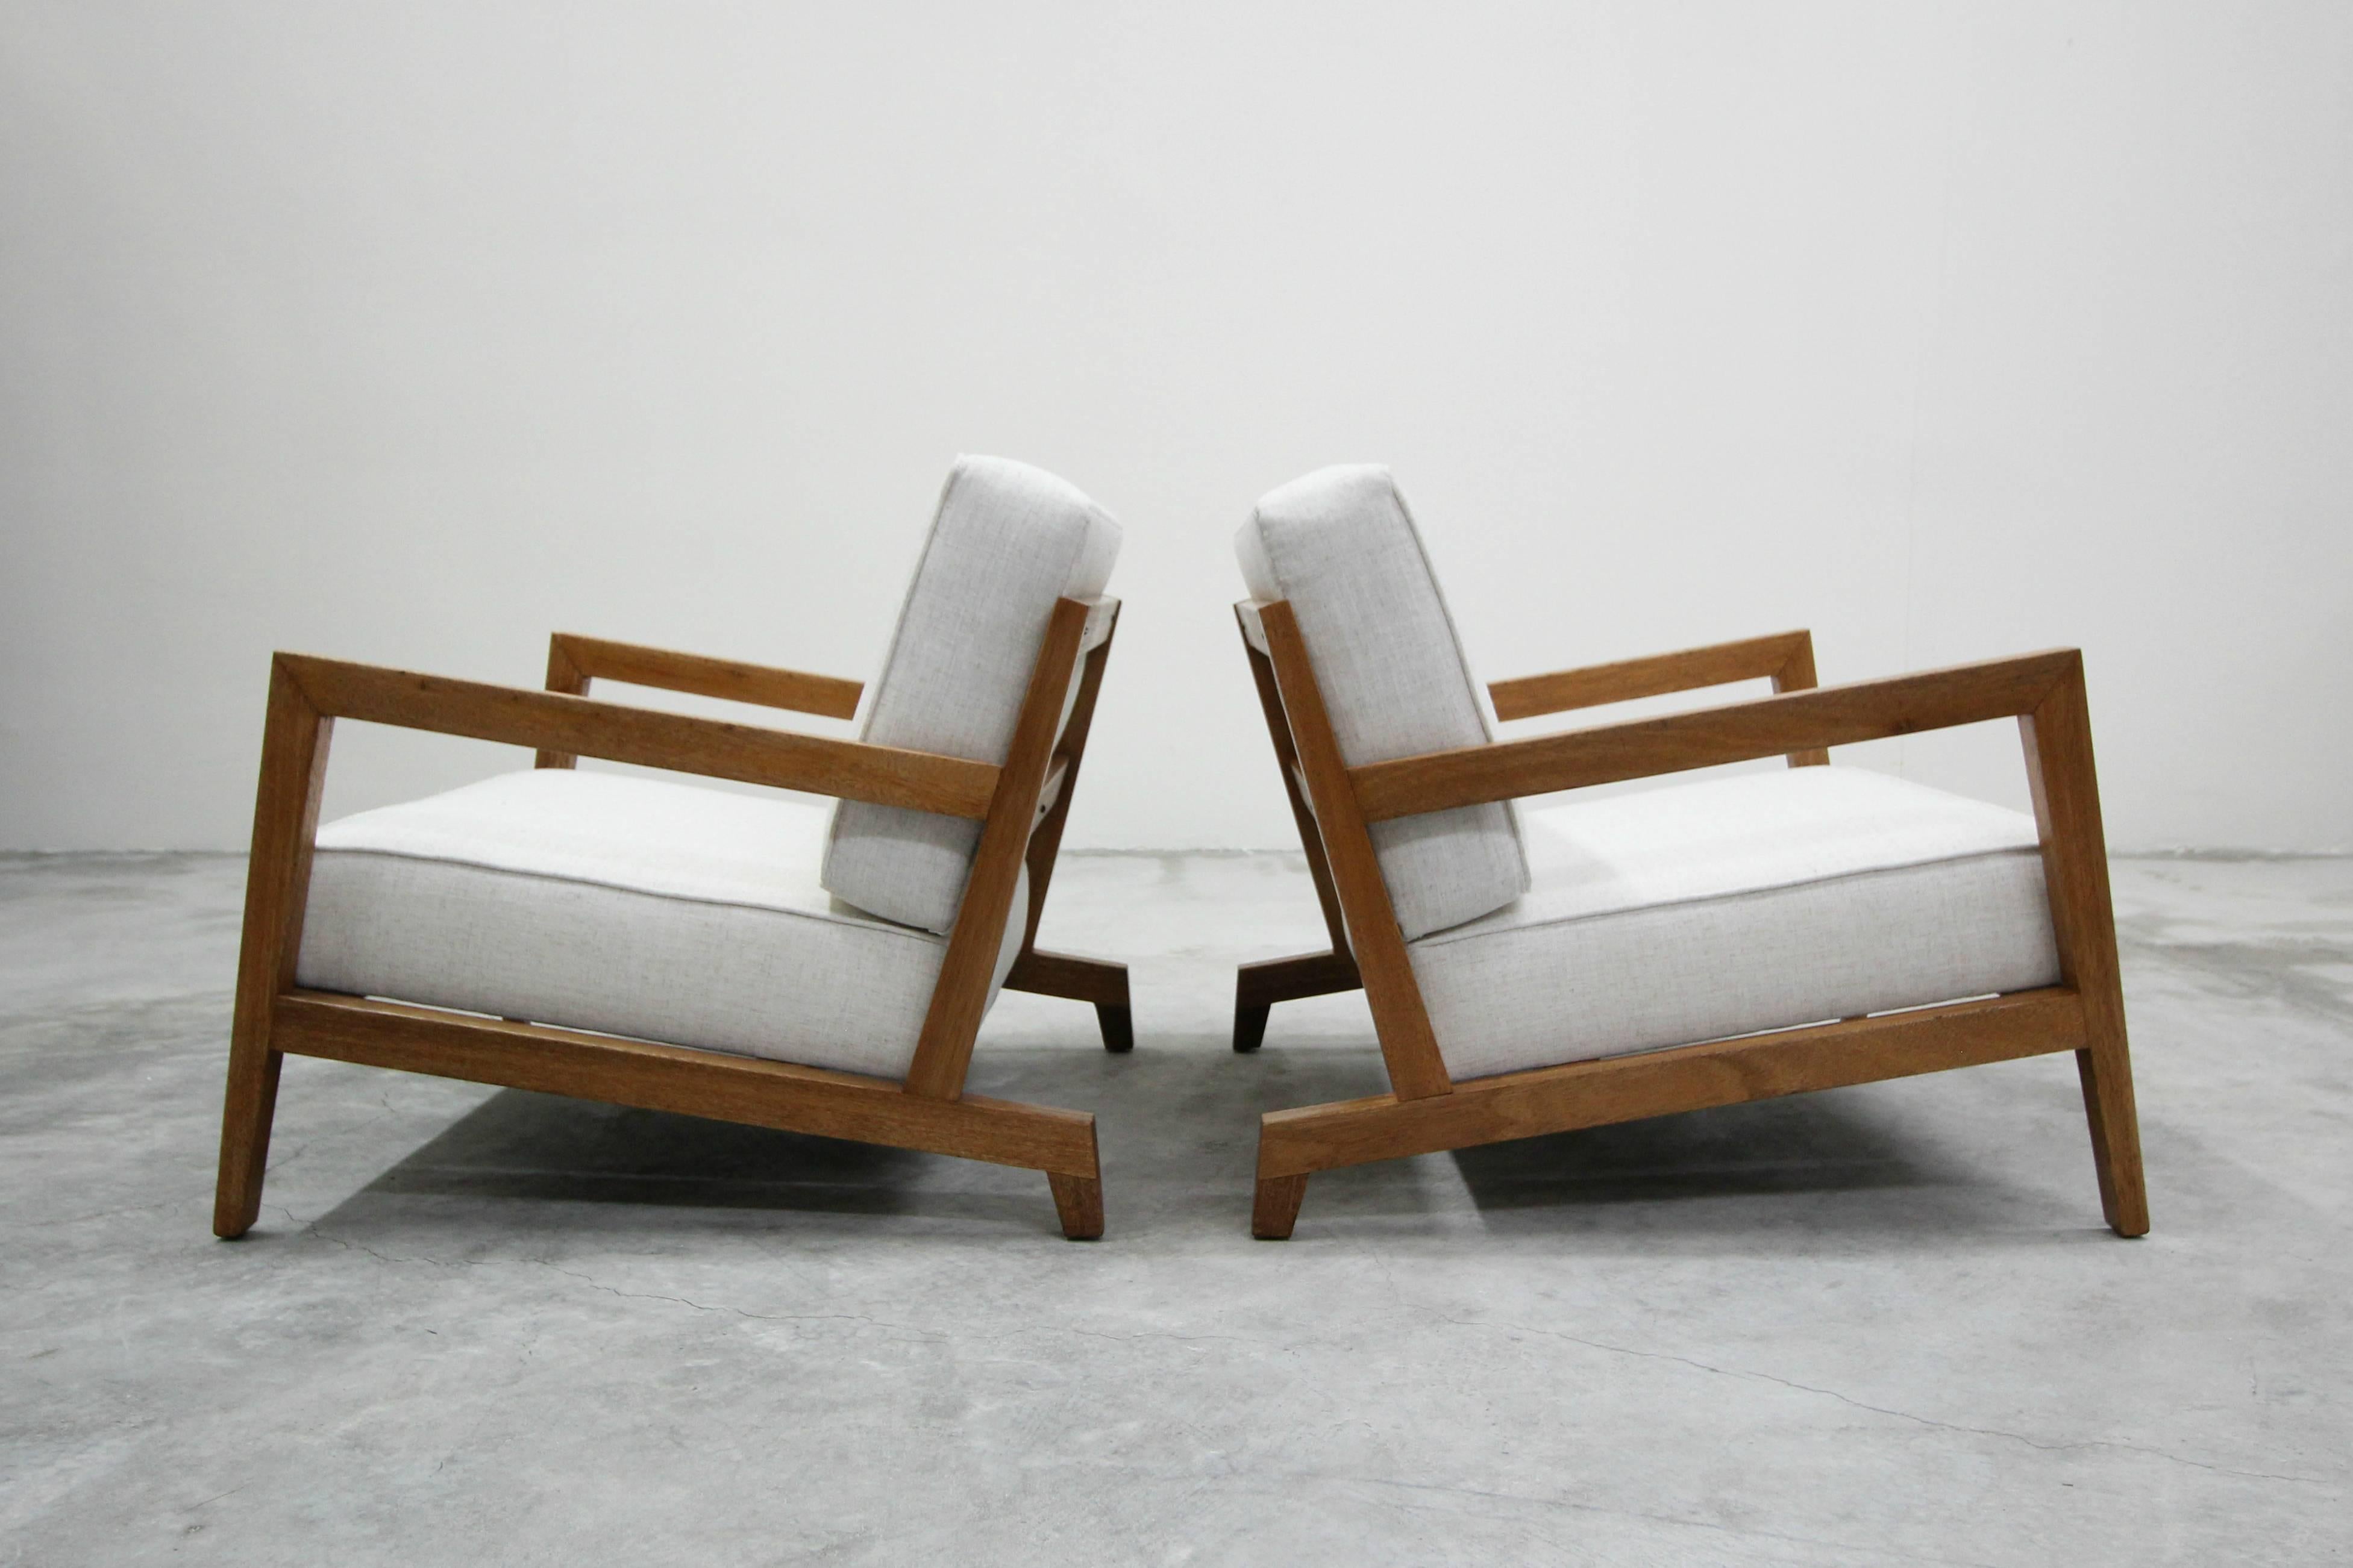 This is an absolutely gorgeous pair of midcentury craftsman lounge chairs. Constructed of solid wood with a very minimal but artistic profile. Probably handcrafted in the 1950s this pair of chairs has lots of character in their details. The